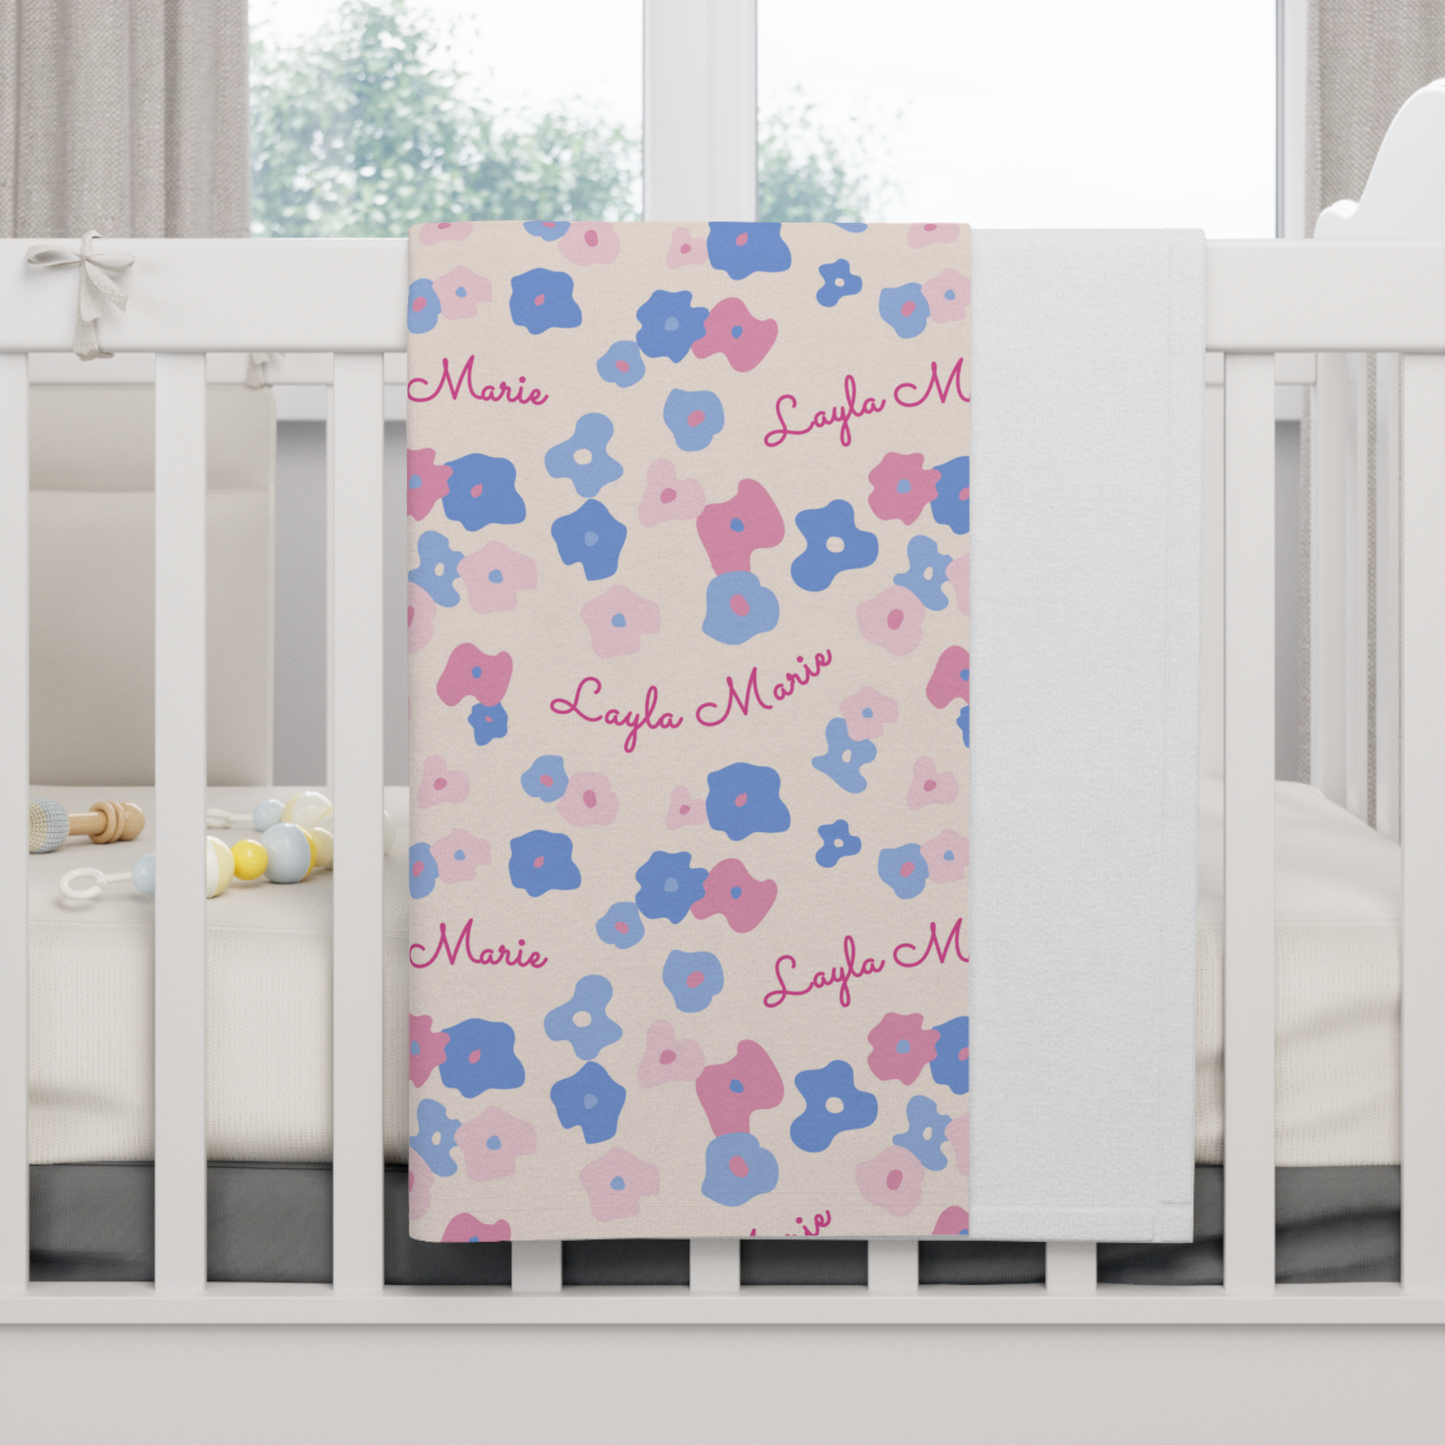 Fleece personalized baby blanket in graphic pink and blue daisy pattern hung over side of white crib with window in the background